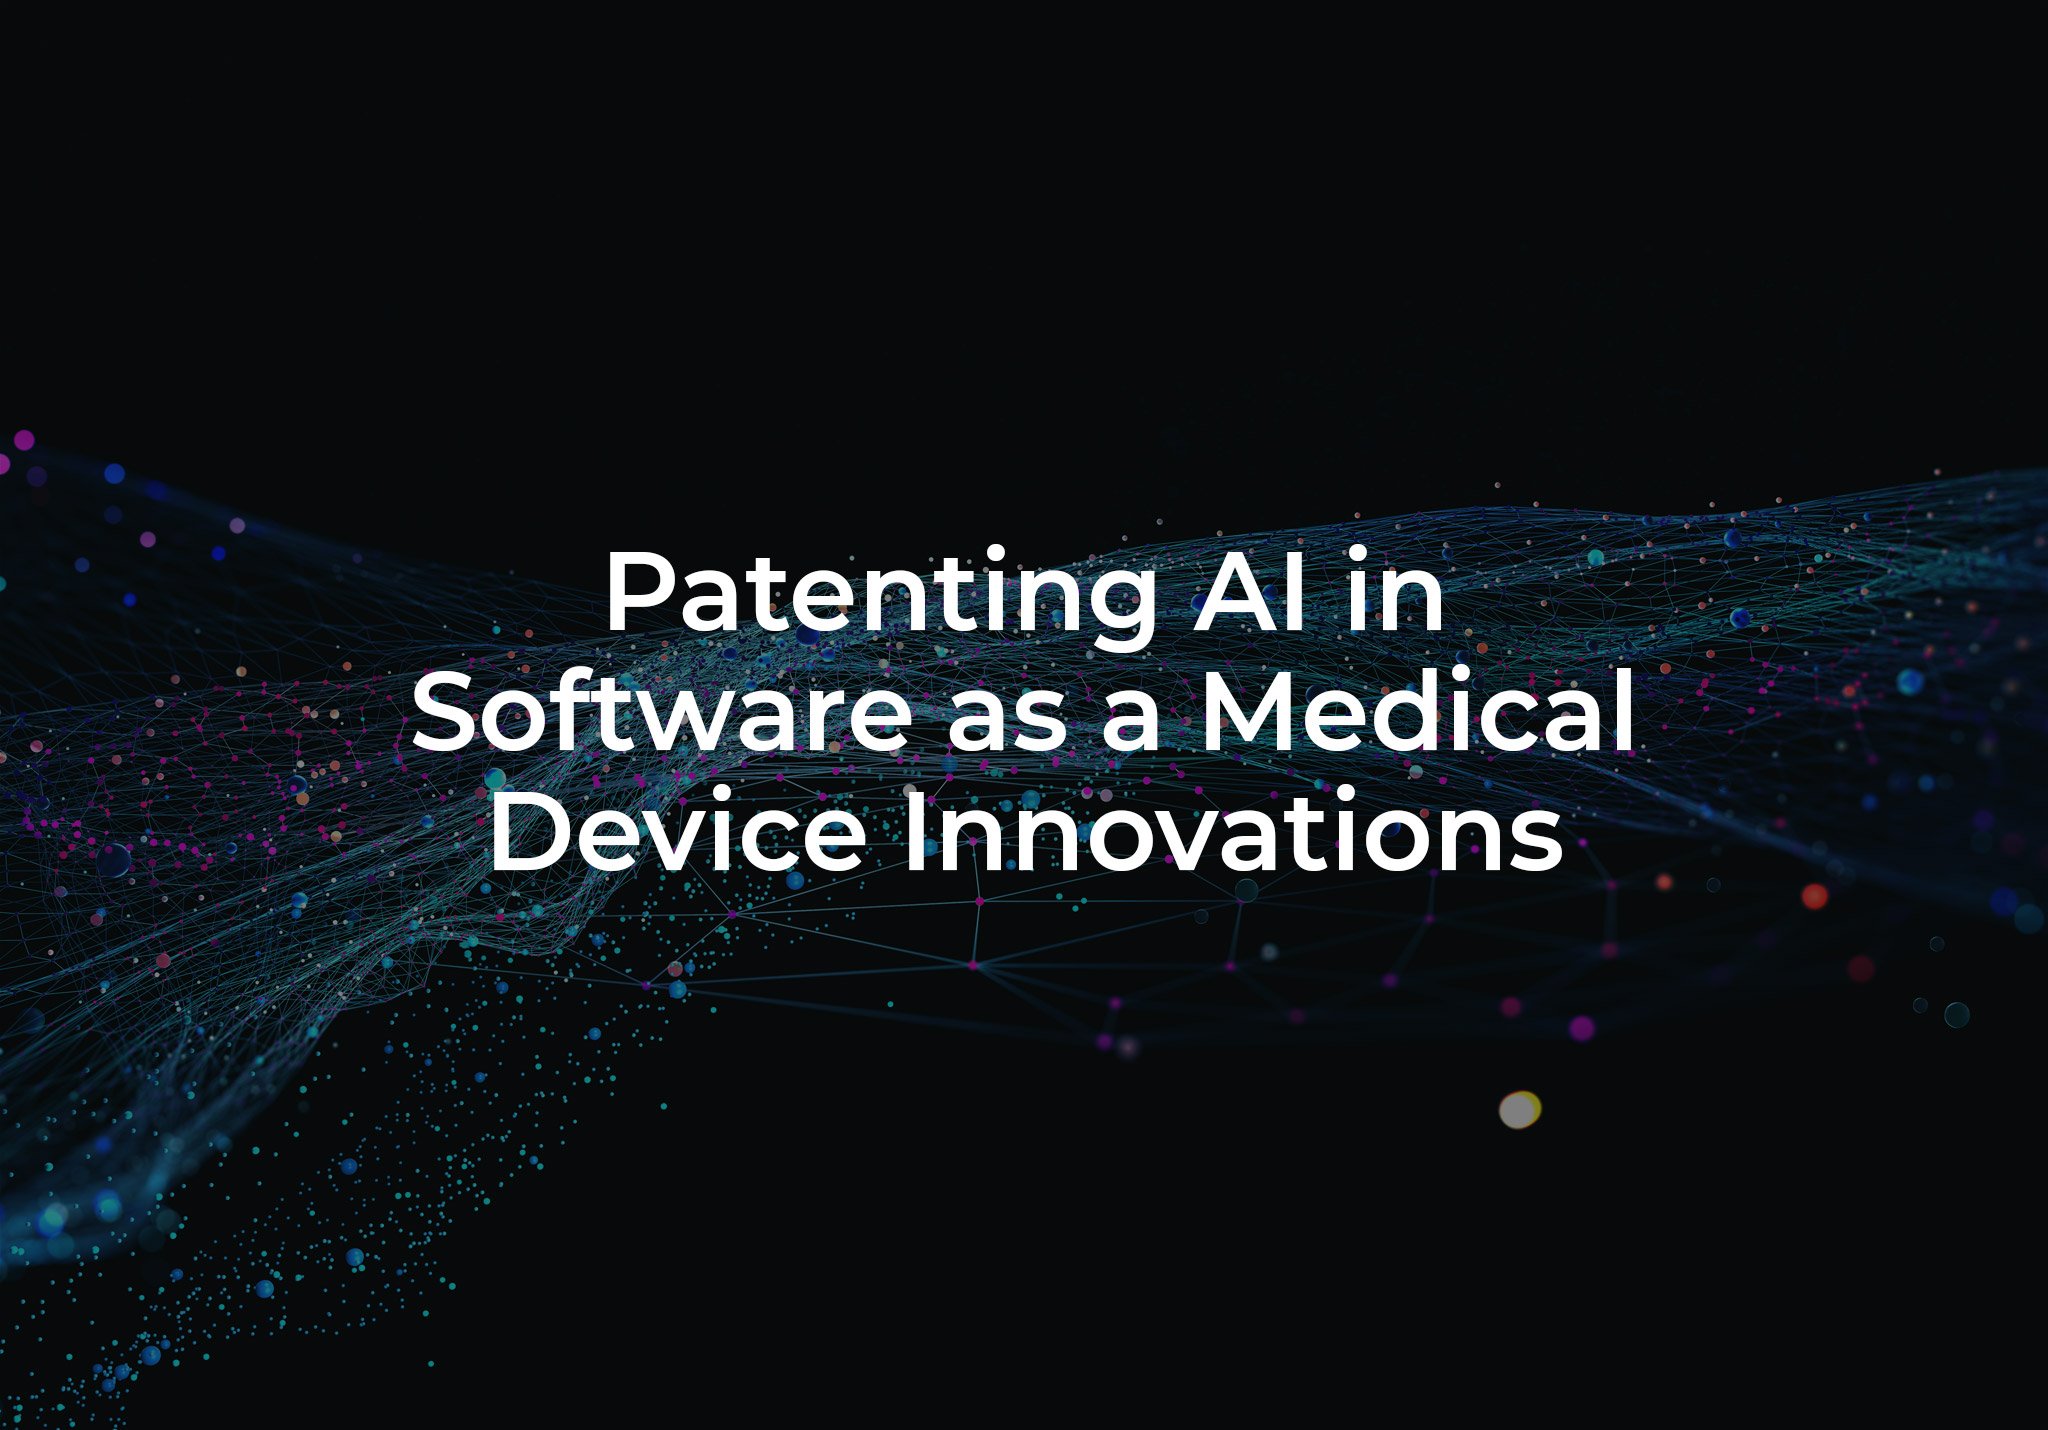 Patenting AI in Software as a Medical Device Innovations